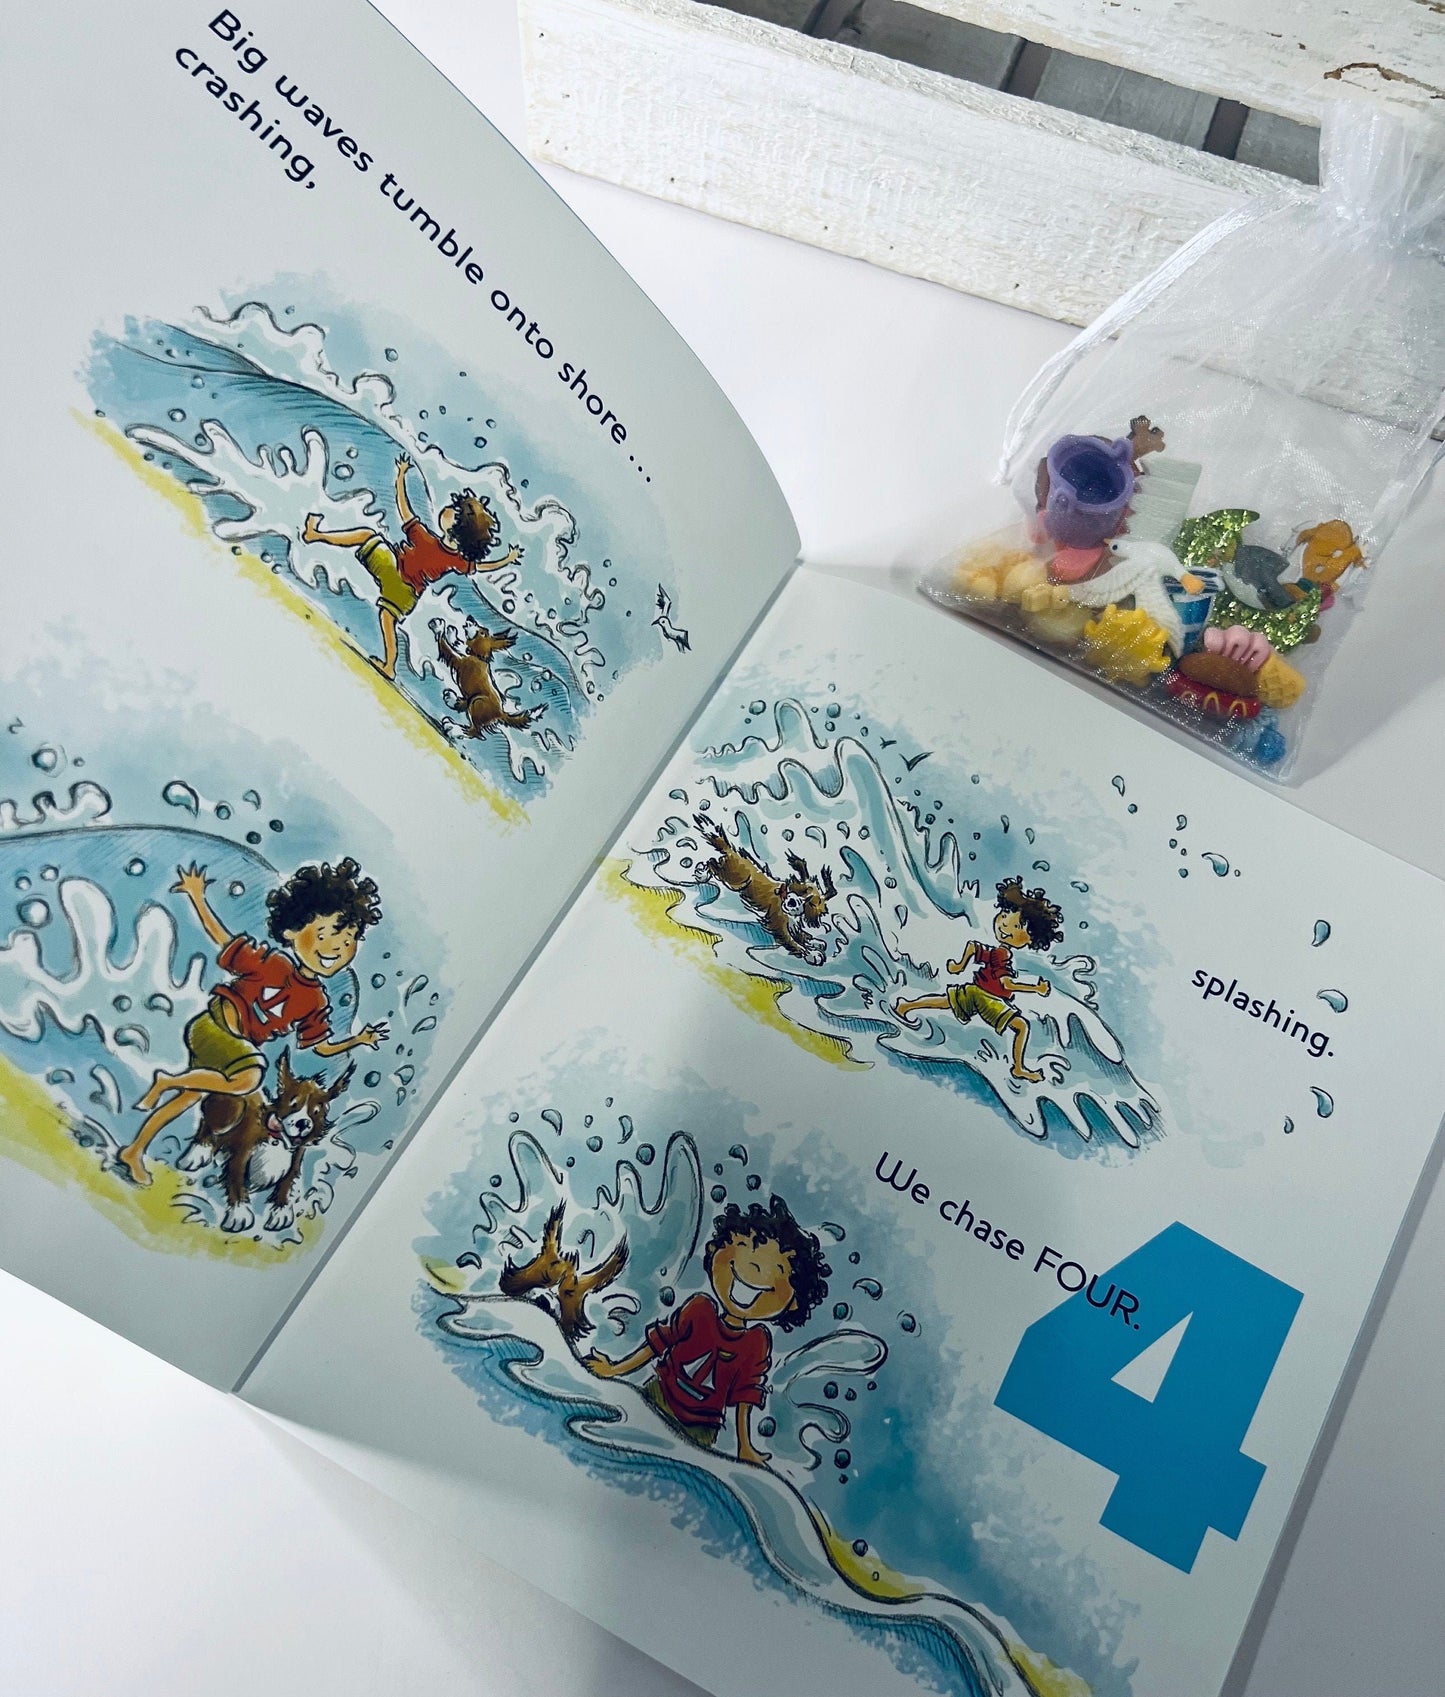 1 2 3 By the Sea Book for Counting Beach Theme Book Preschool Counting Book Story Objects for Beach Book